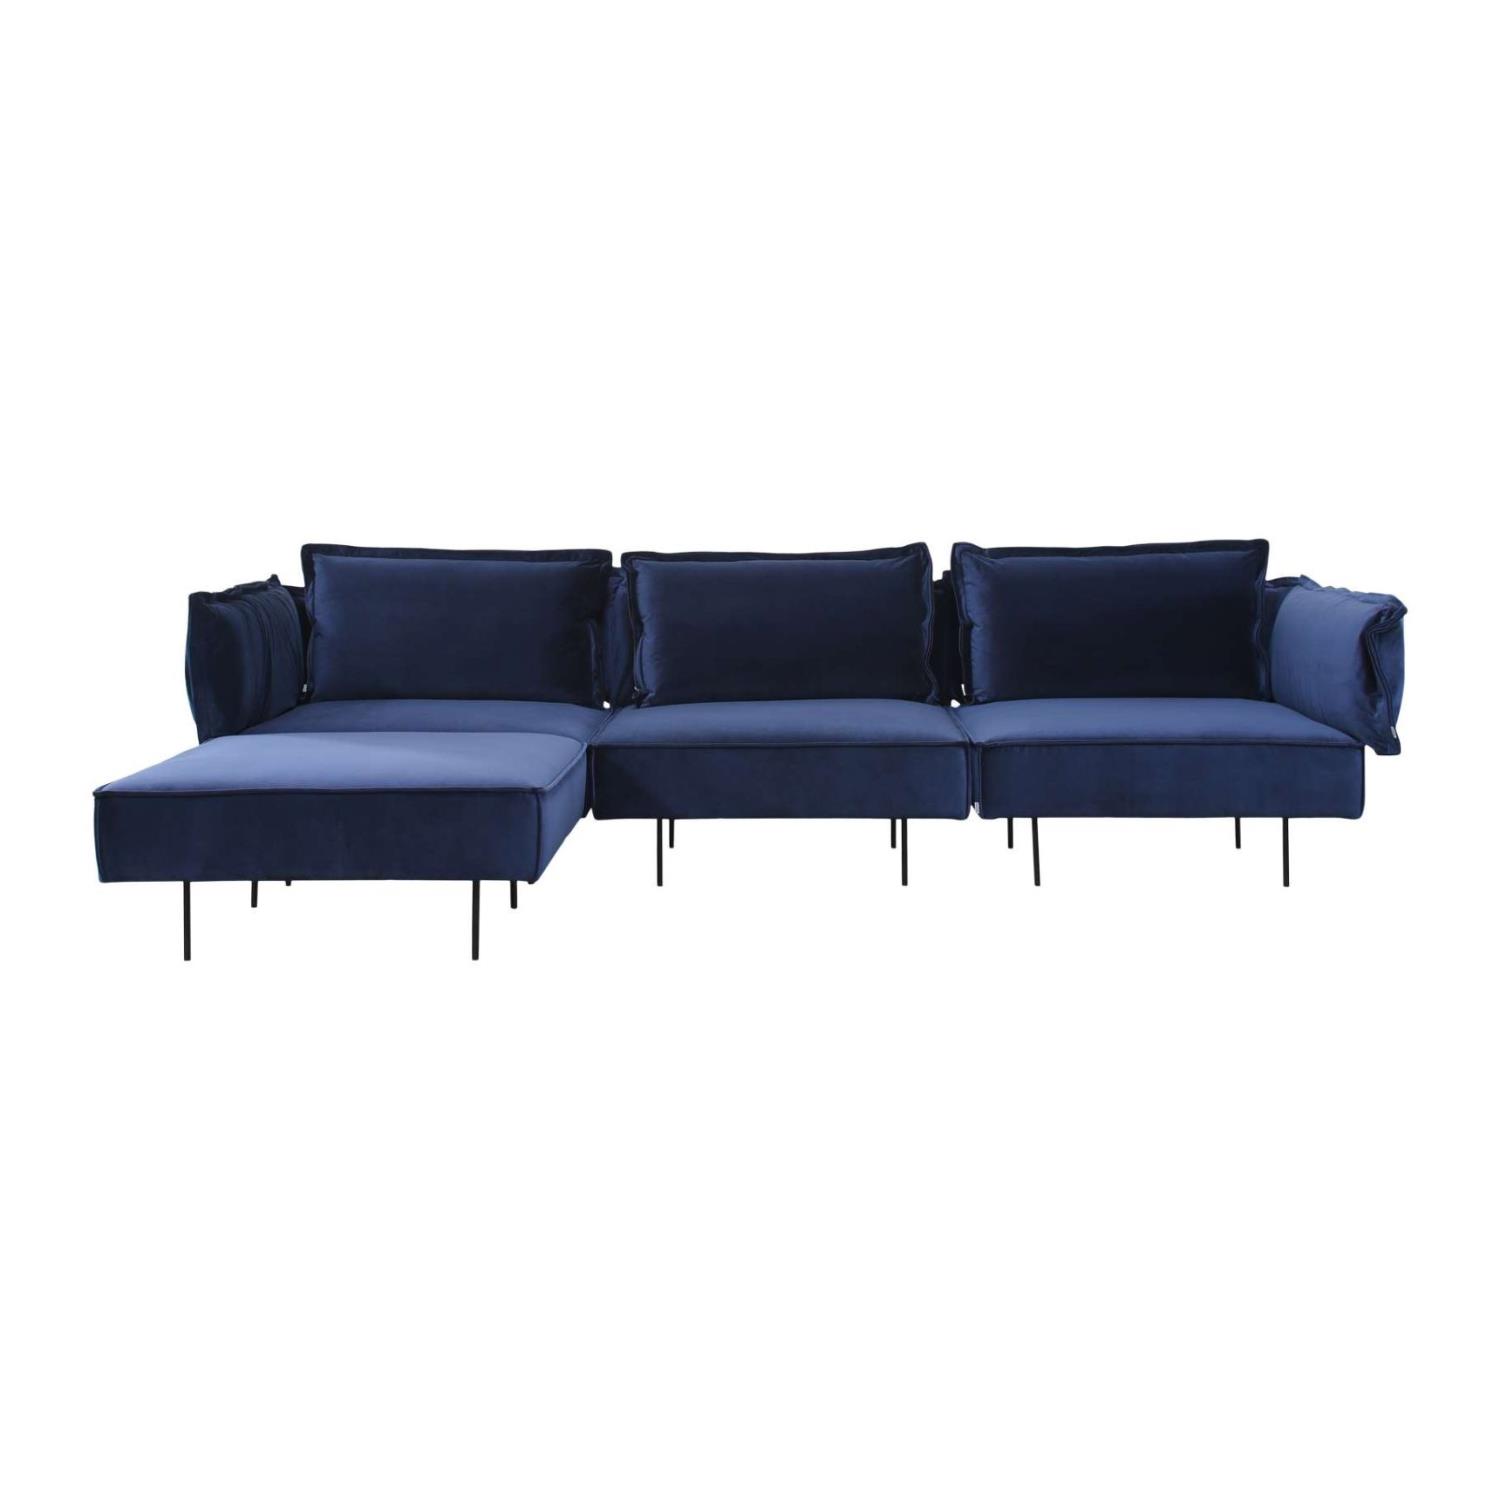 3-Seat Modular Sofa With Chaise